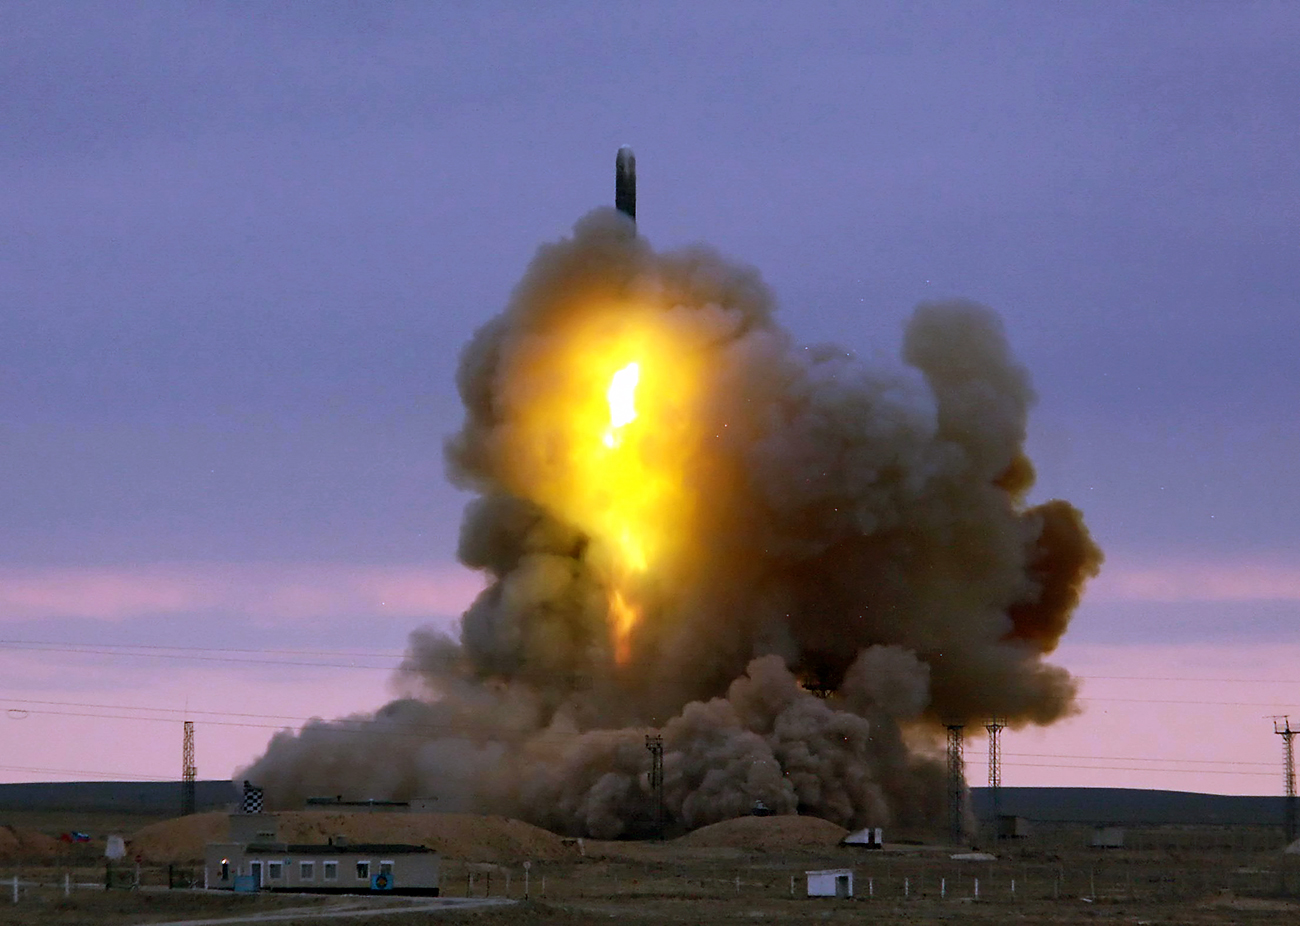 The "product 4202" was tested on Oct. 25 at the Kura range in the Kamchatka Region. Pictured: The RS-18 Stiletto intercontinental ballistic missile has been launched from the Baikonur Cosmodrome having its target on the Kura training range.